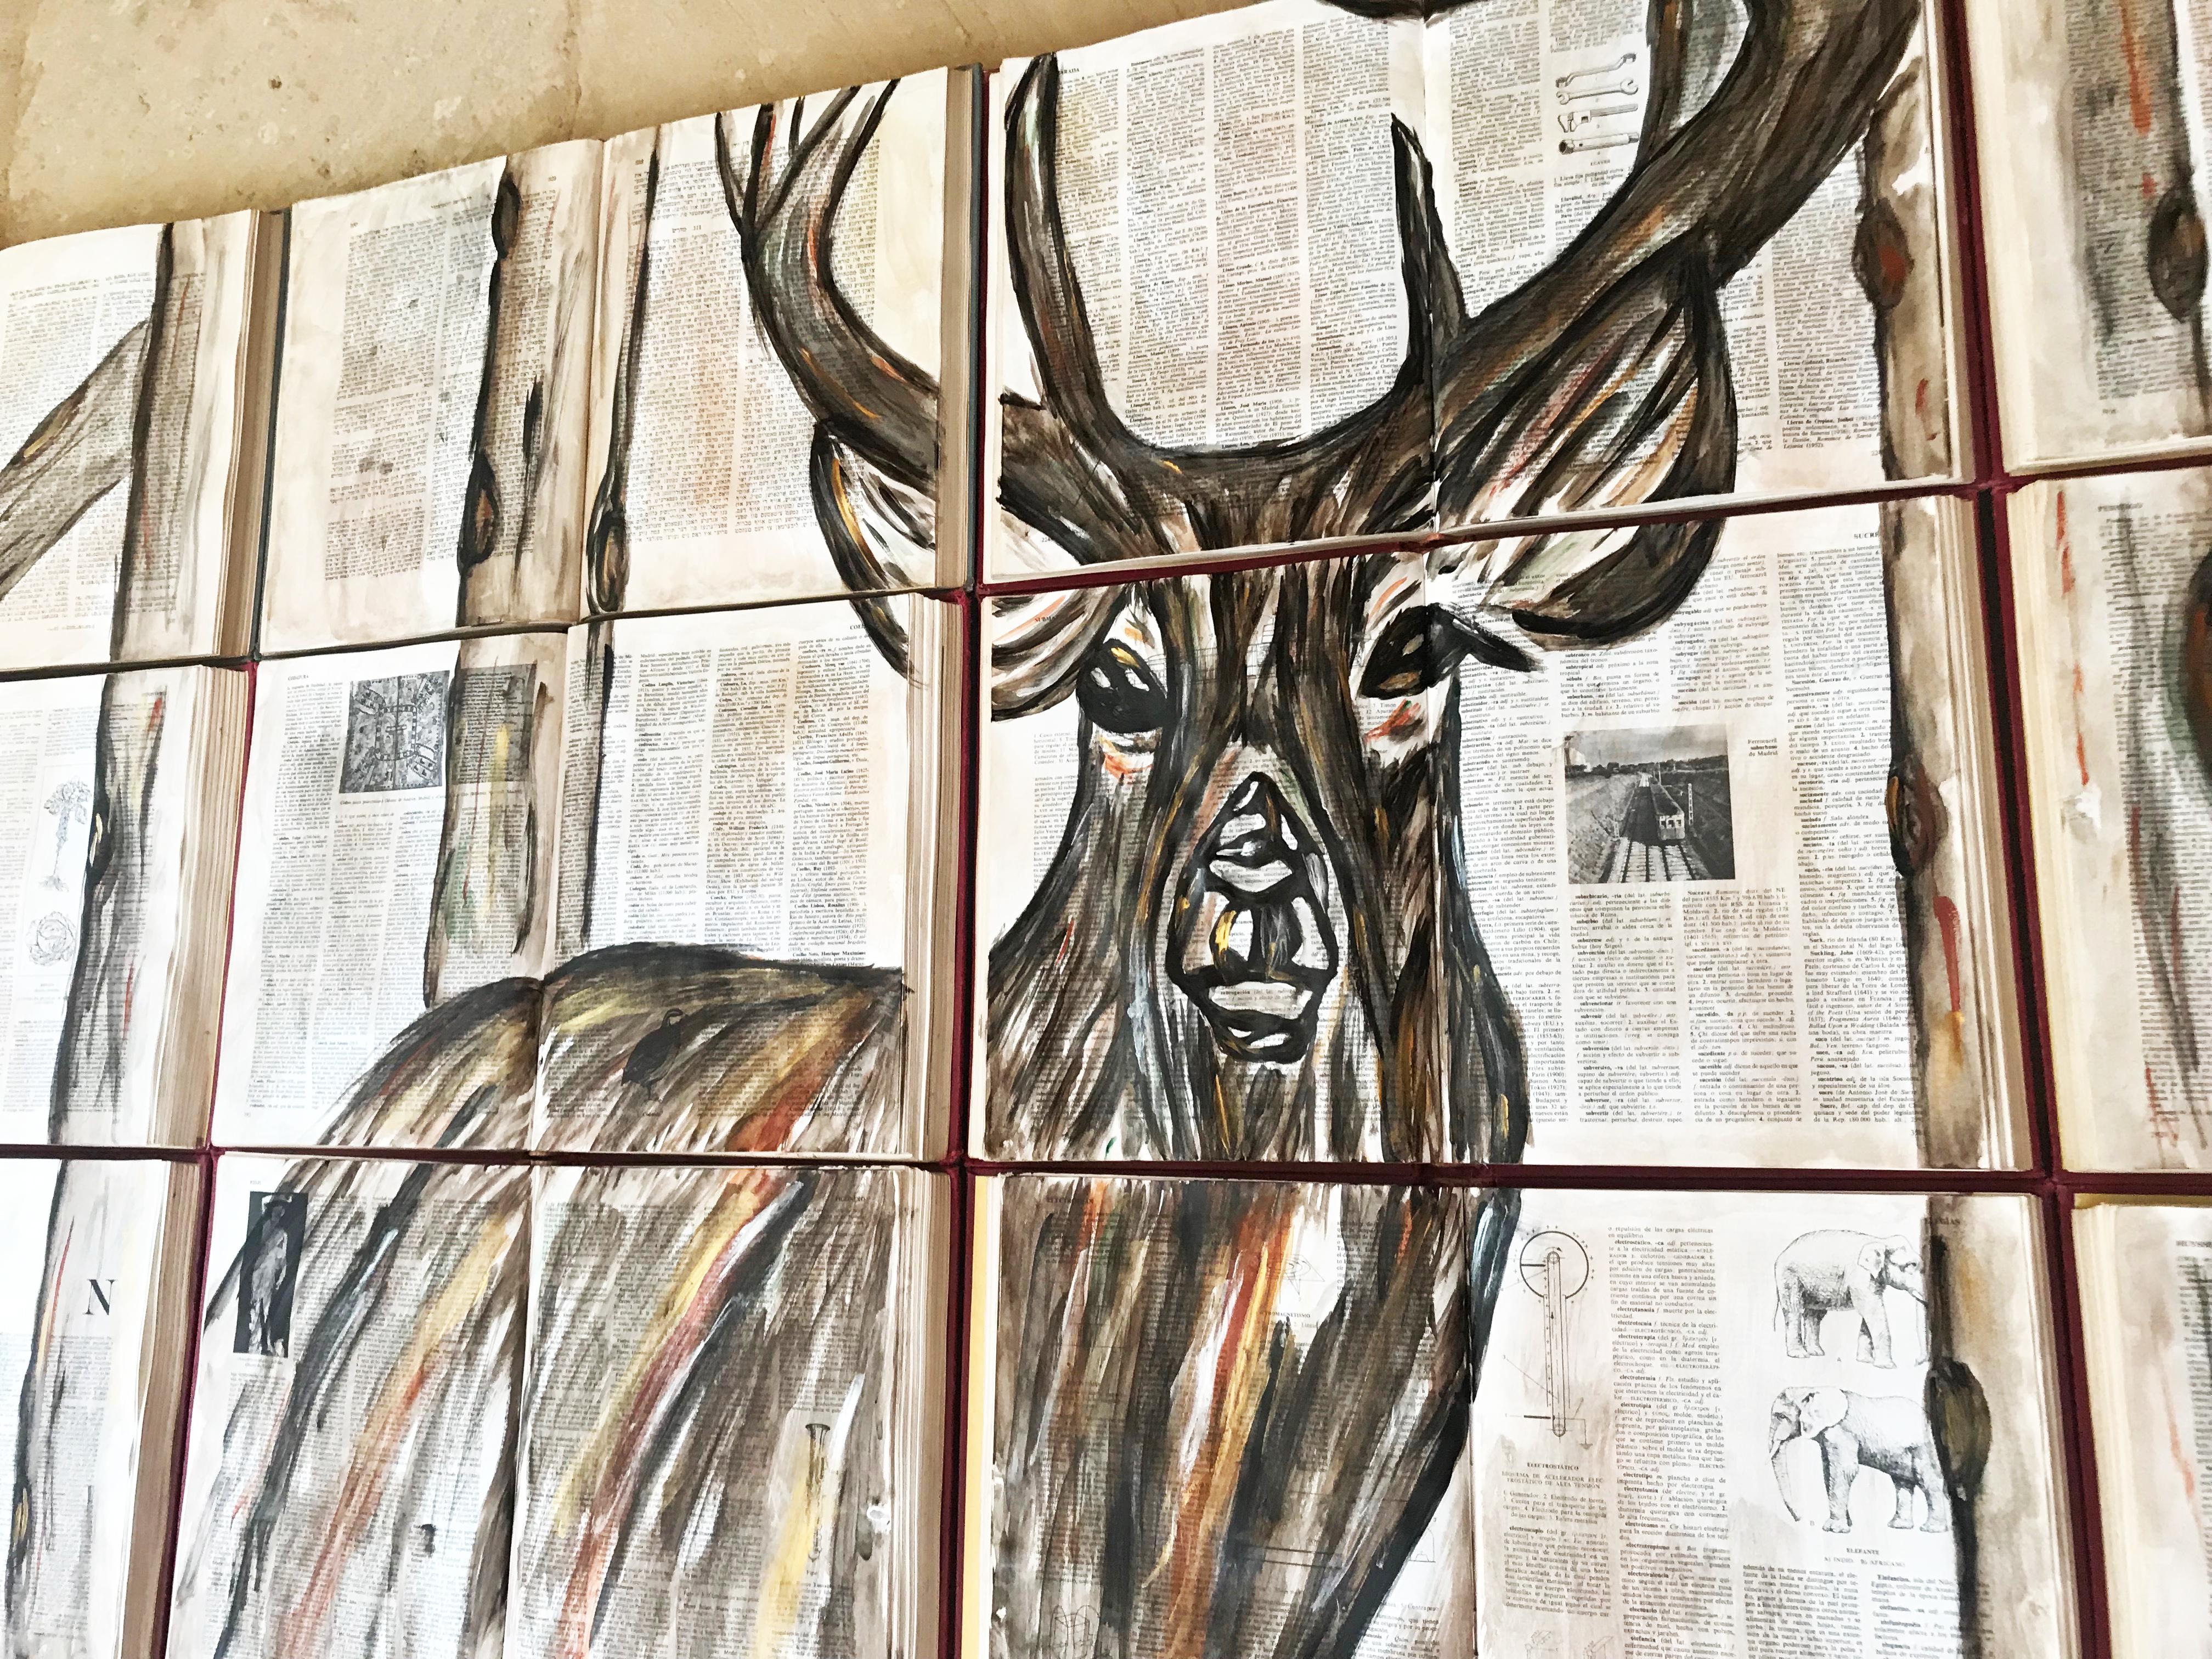 This unique piece was painted upon a book canvass. The artist gives these abandoned books a new life and purpose. The brown, copper and orange colors fill the space with a rustic feeling. They are easy to install for they have metal fixings on the